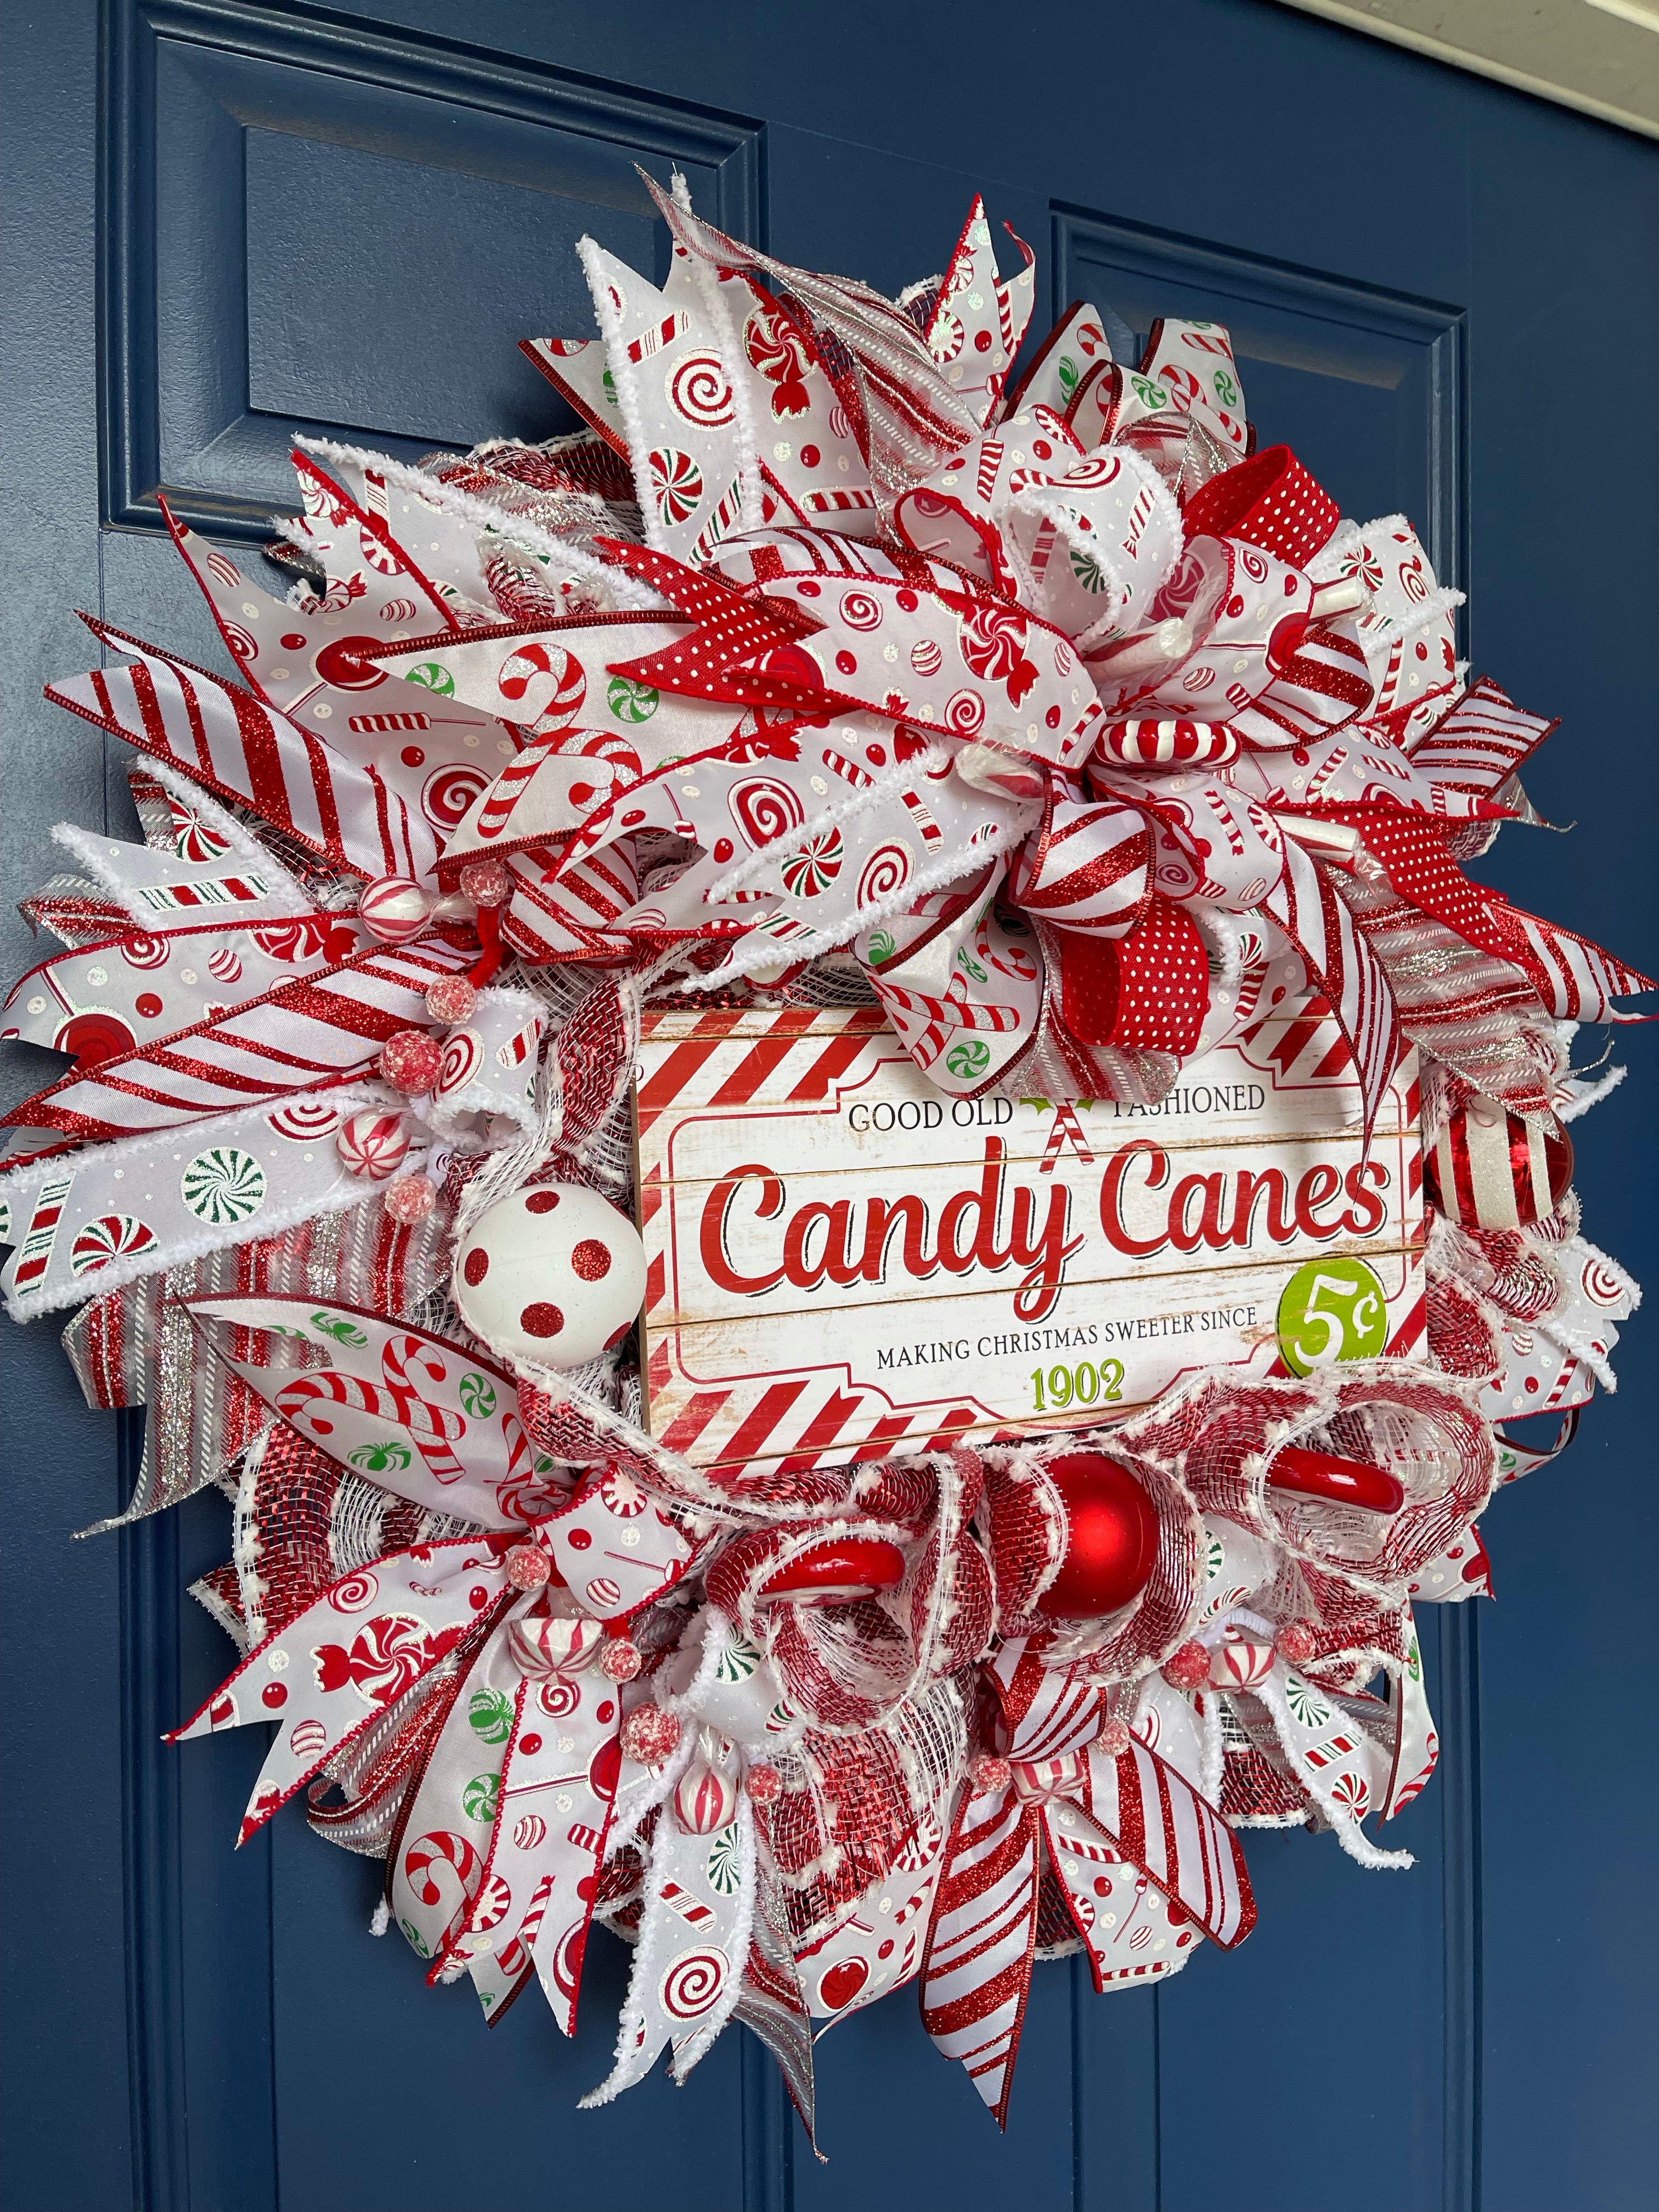 side view of the candy cane Christmas wreath hanging on blue door